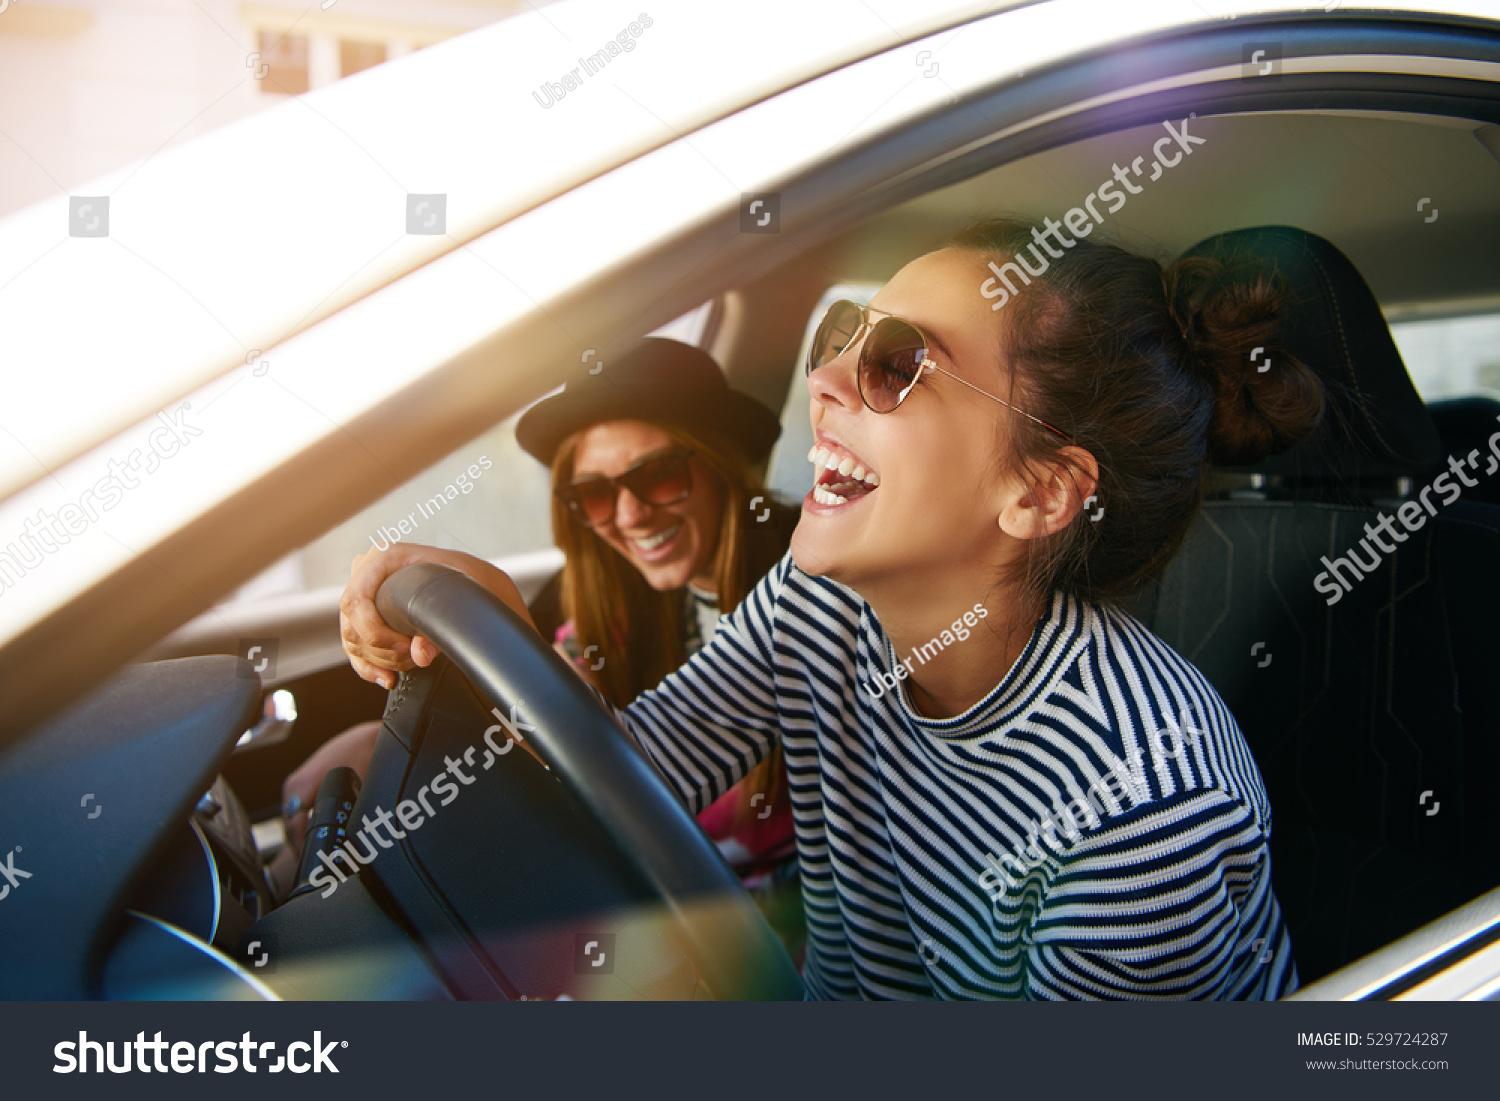 stock-photo-laughing-young-woman-wearing-sunglasses-driving-a-car-with-her-girl-friend-close-up-profile-view-529724287.jpg